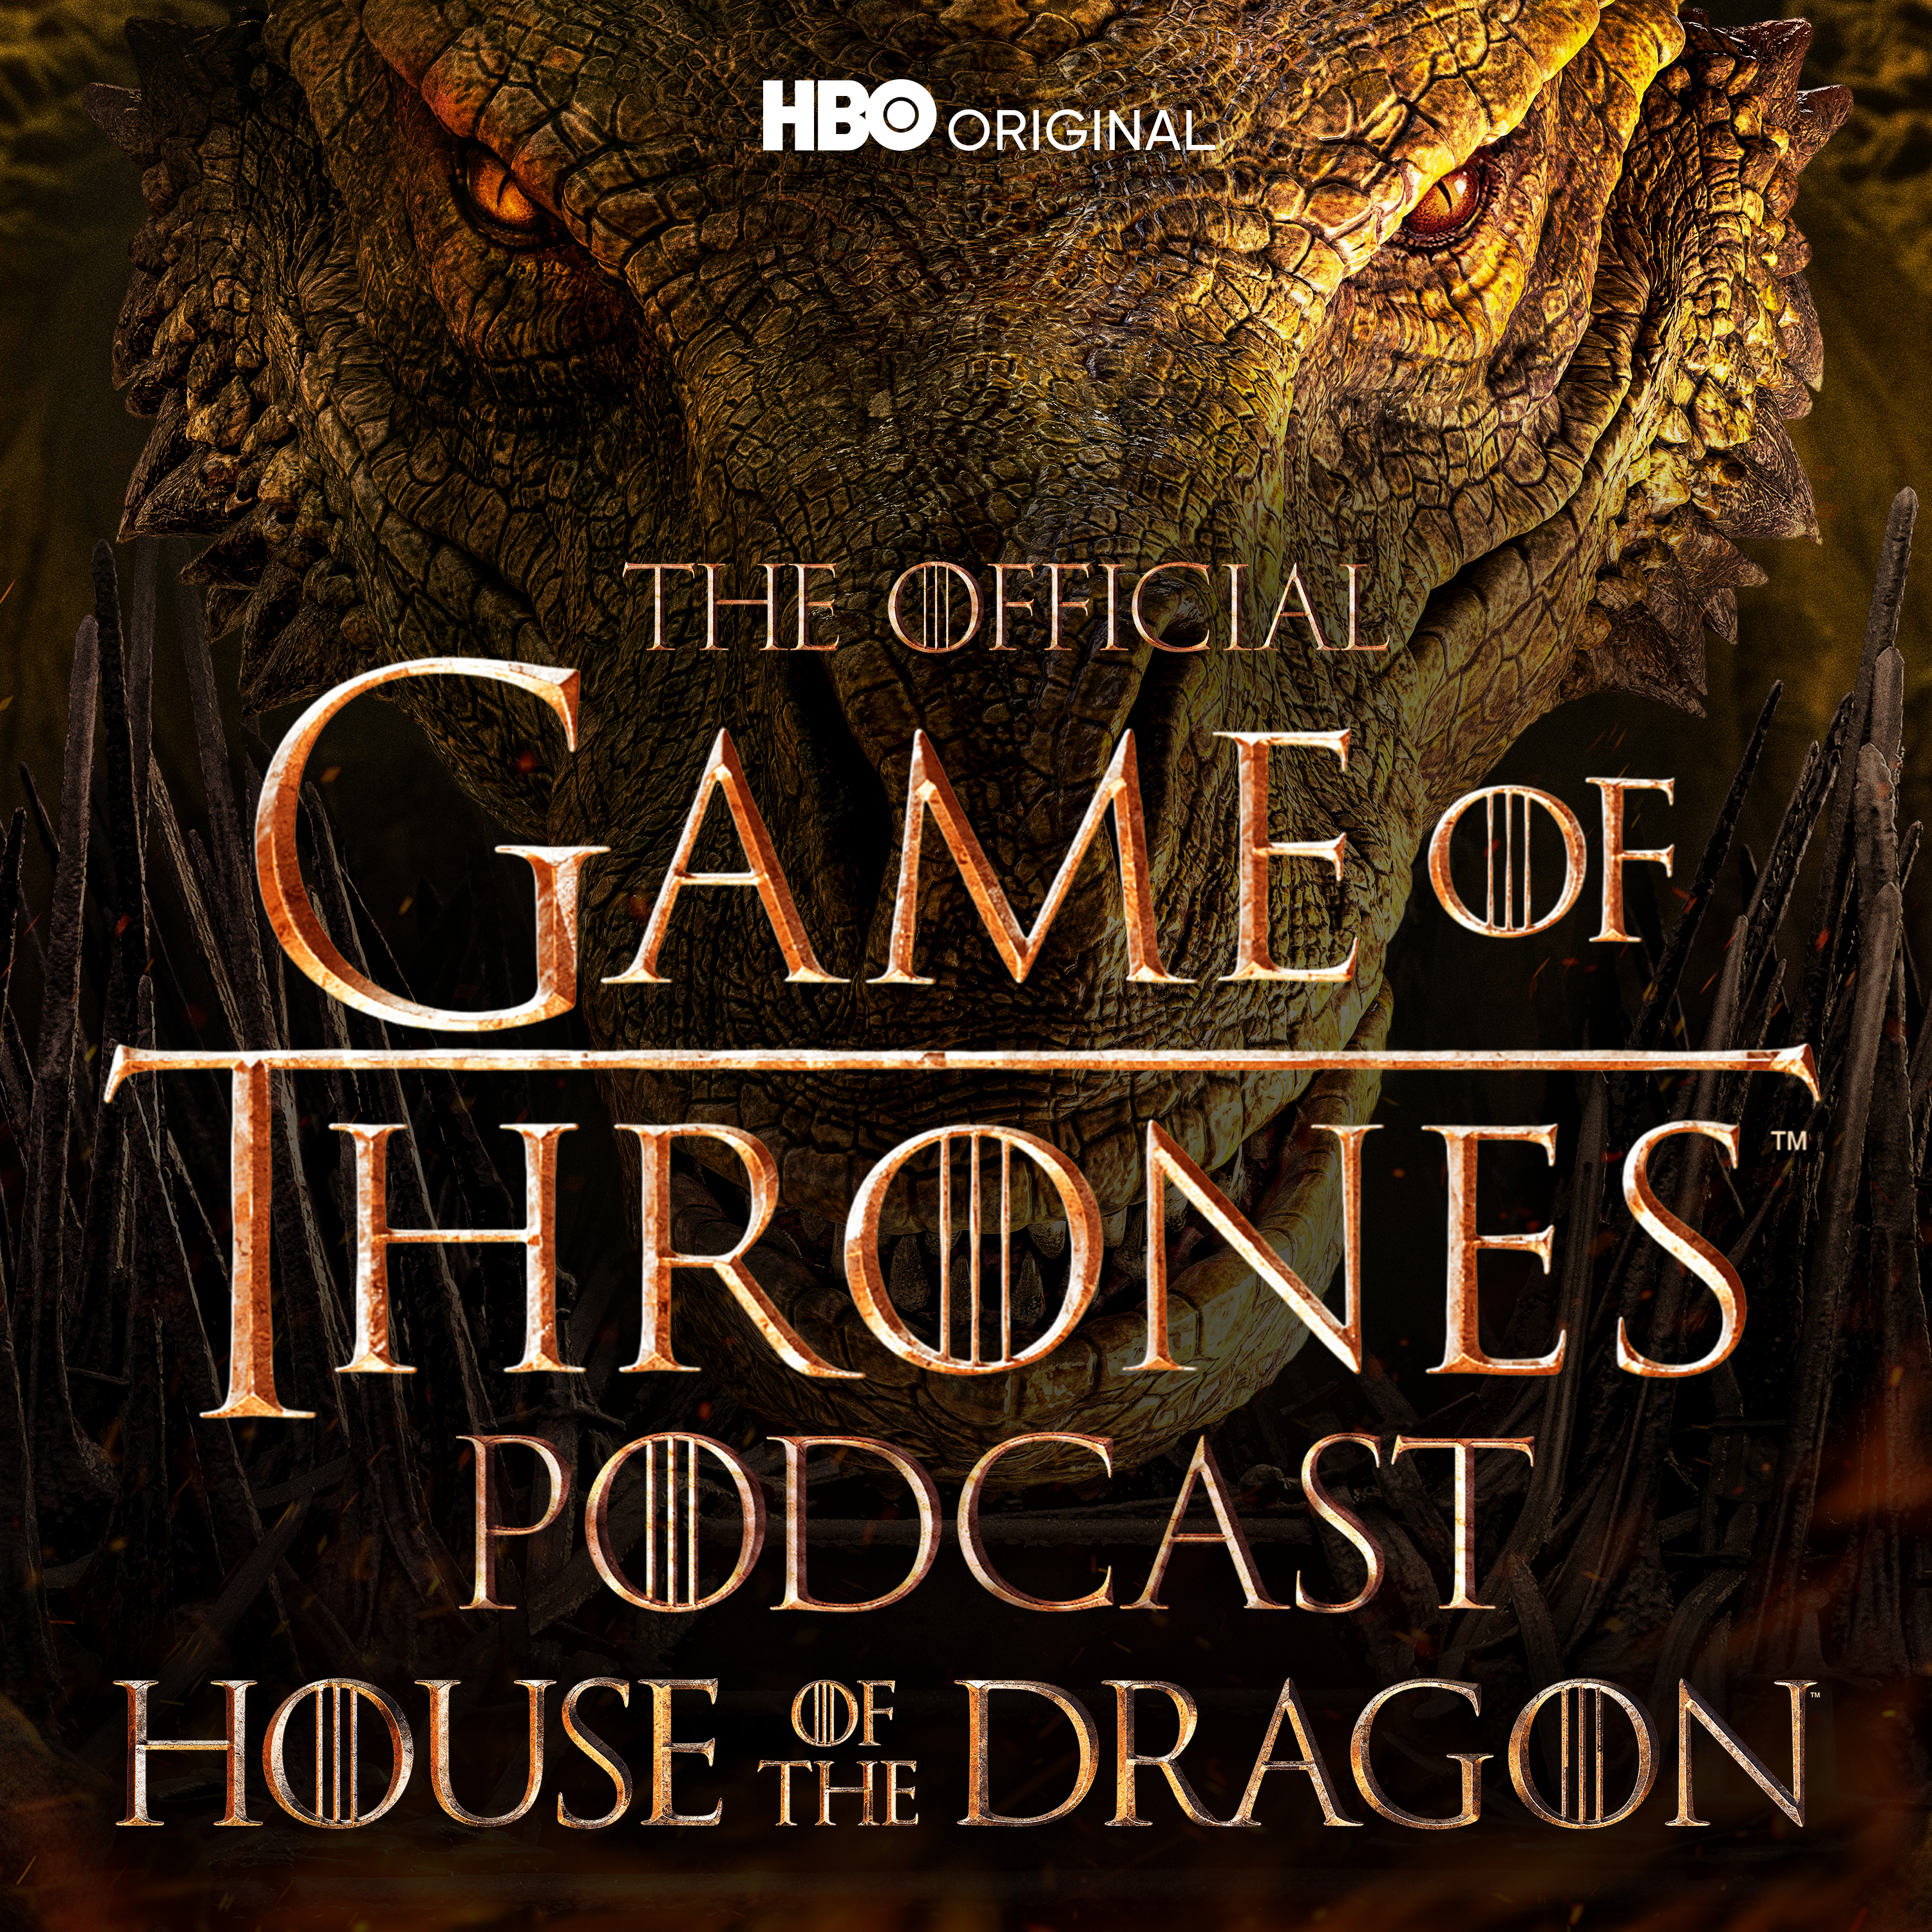 Introducing The Offical Game of Thrones Podcast: House of the Dragon